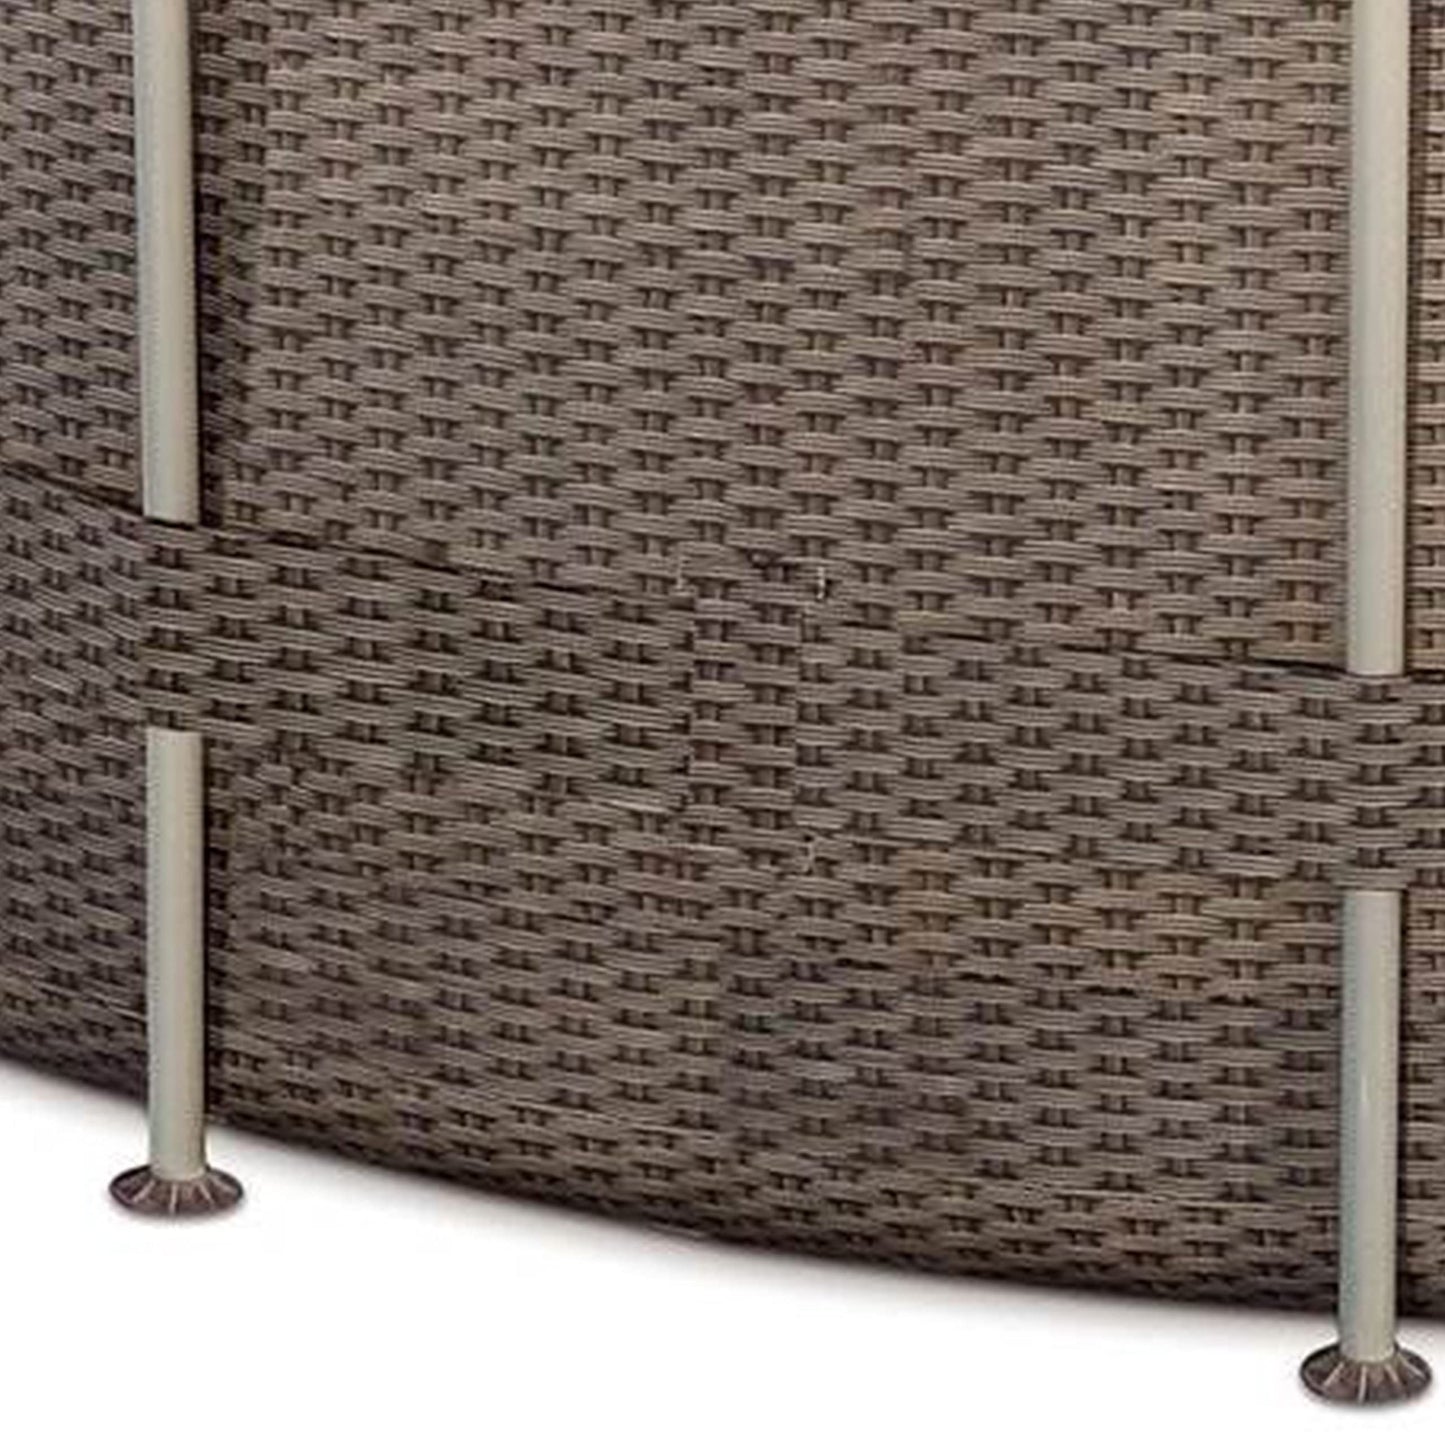 Summer Waves P20014482 14ft x 48in Outdoor Round Frame Above Ground Swimming Pool Set with Skimmer Filter Pump, Filter Cartridge, and Ladder, Brown Light Wicker/Sand